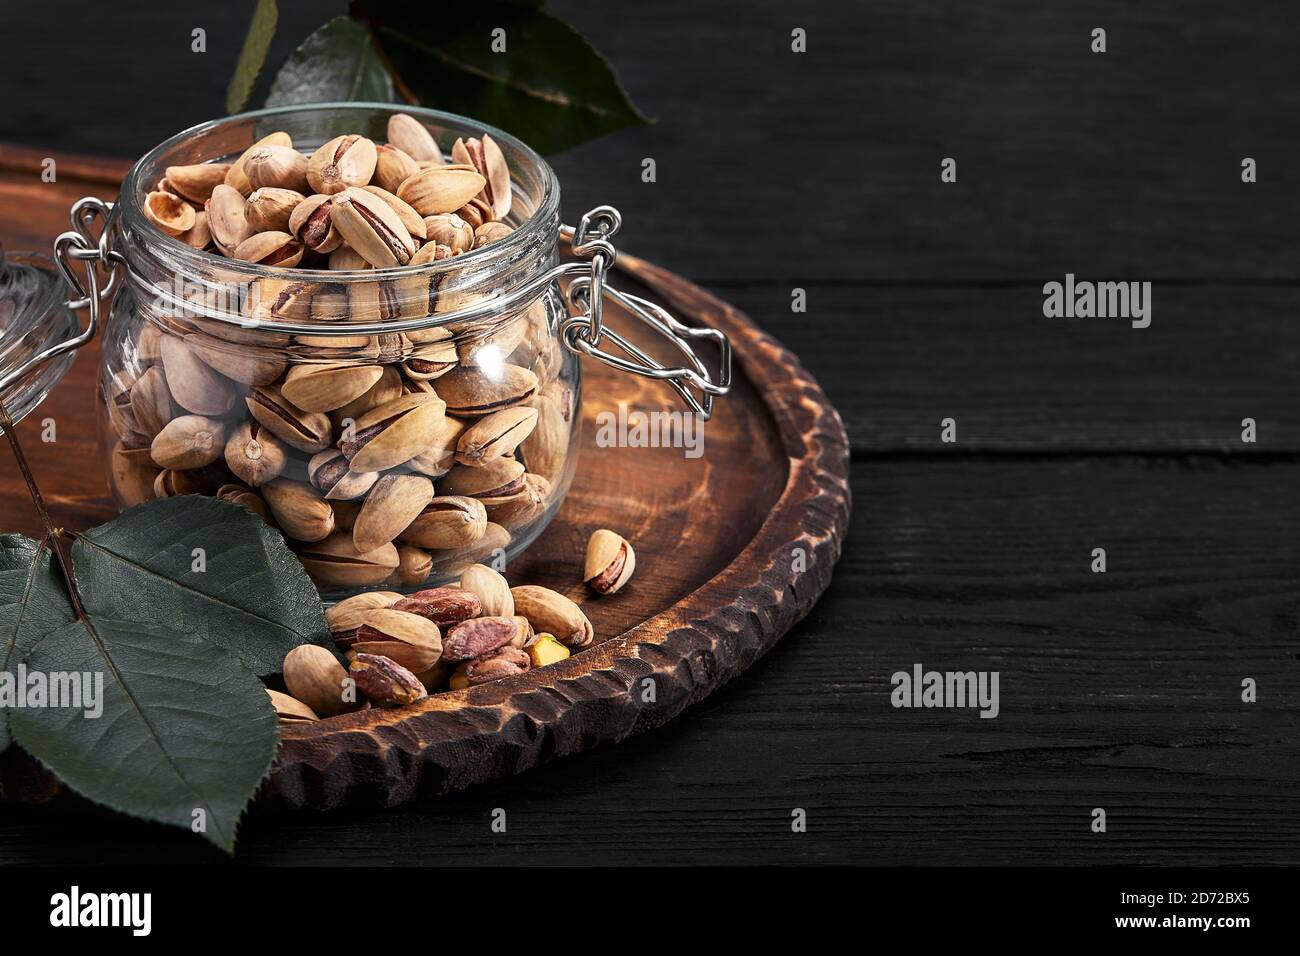 Pistachios nuts on dark background, top view, healthy snack Stock Photo